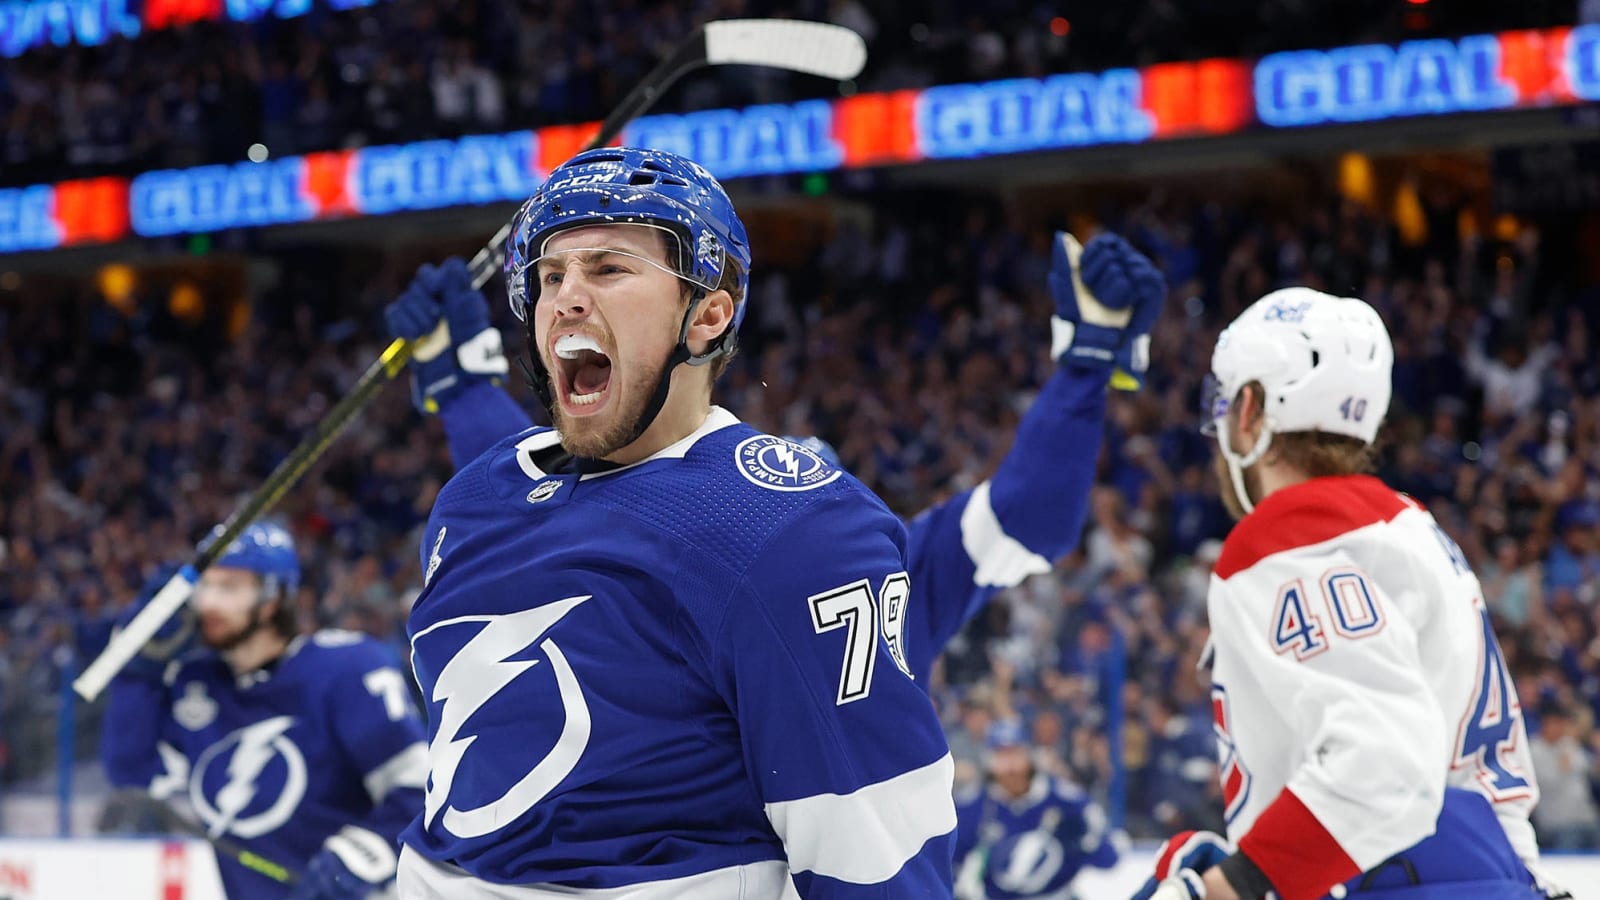 Watch: Kenny Albert had great call about Lightning winning Stanley Cup